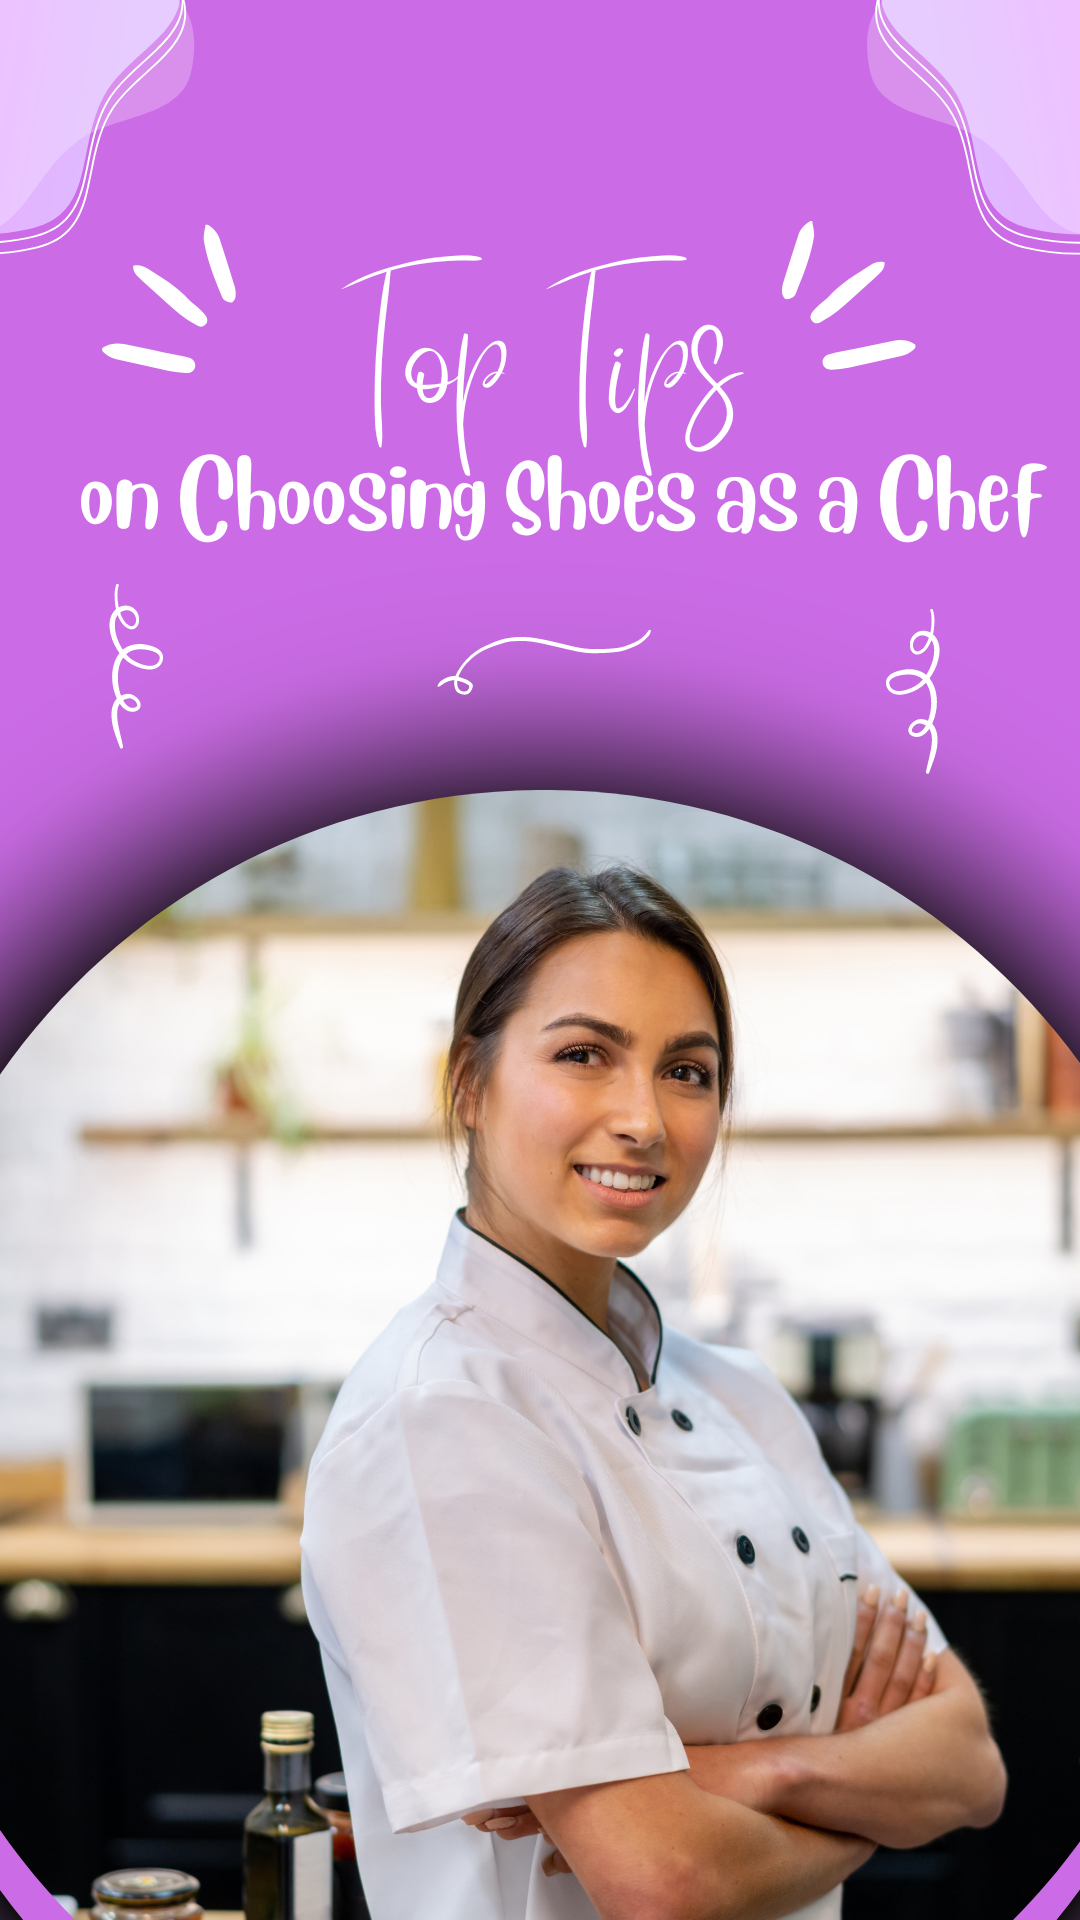 There are some tips to choose suitable chef shoes. We hope that with these tips you can find comfortable and nice chef shoes for yourself.